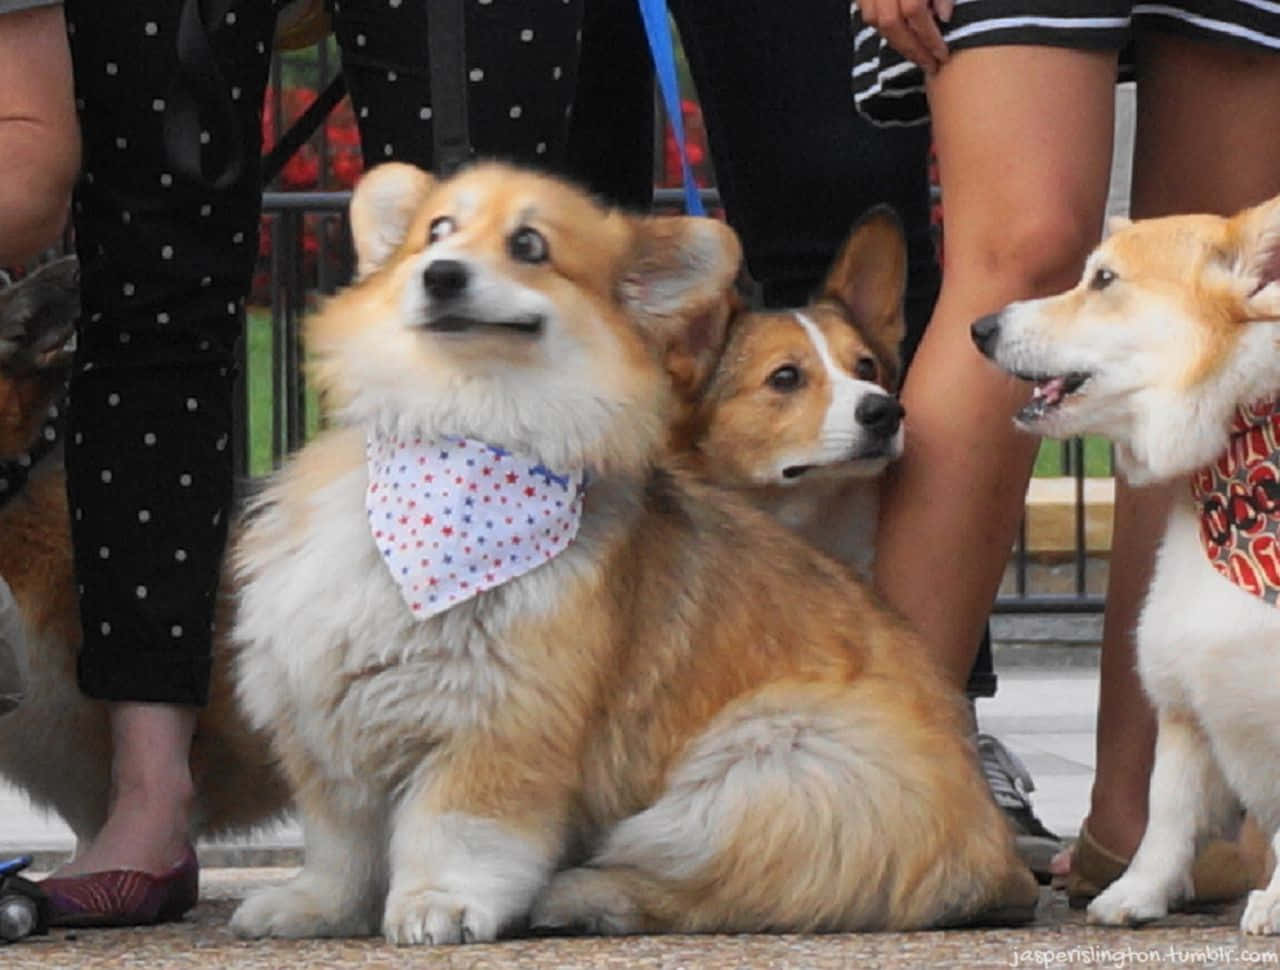 Get a giggle out of this funny Corgi pup!